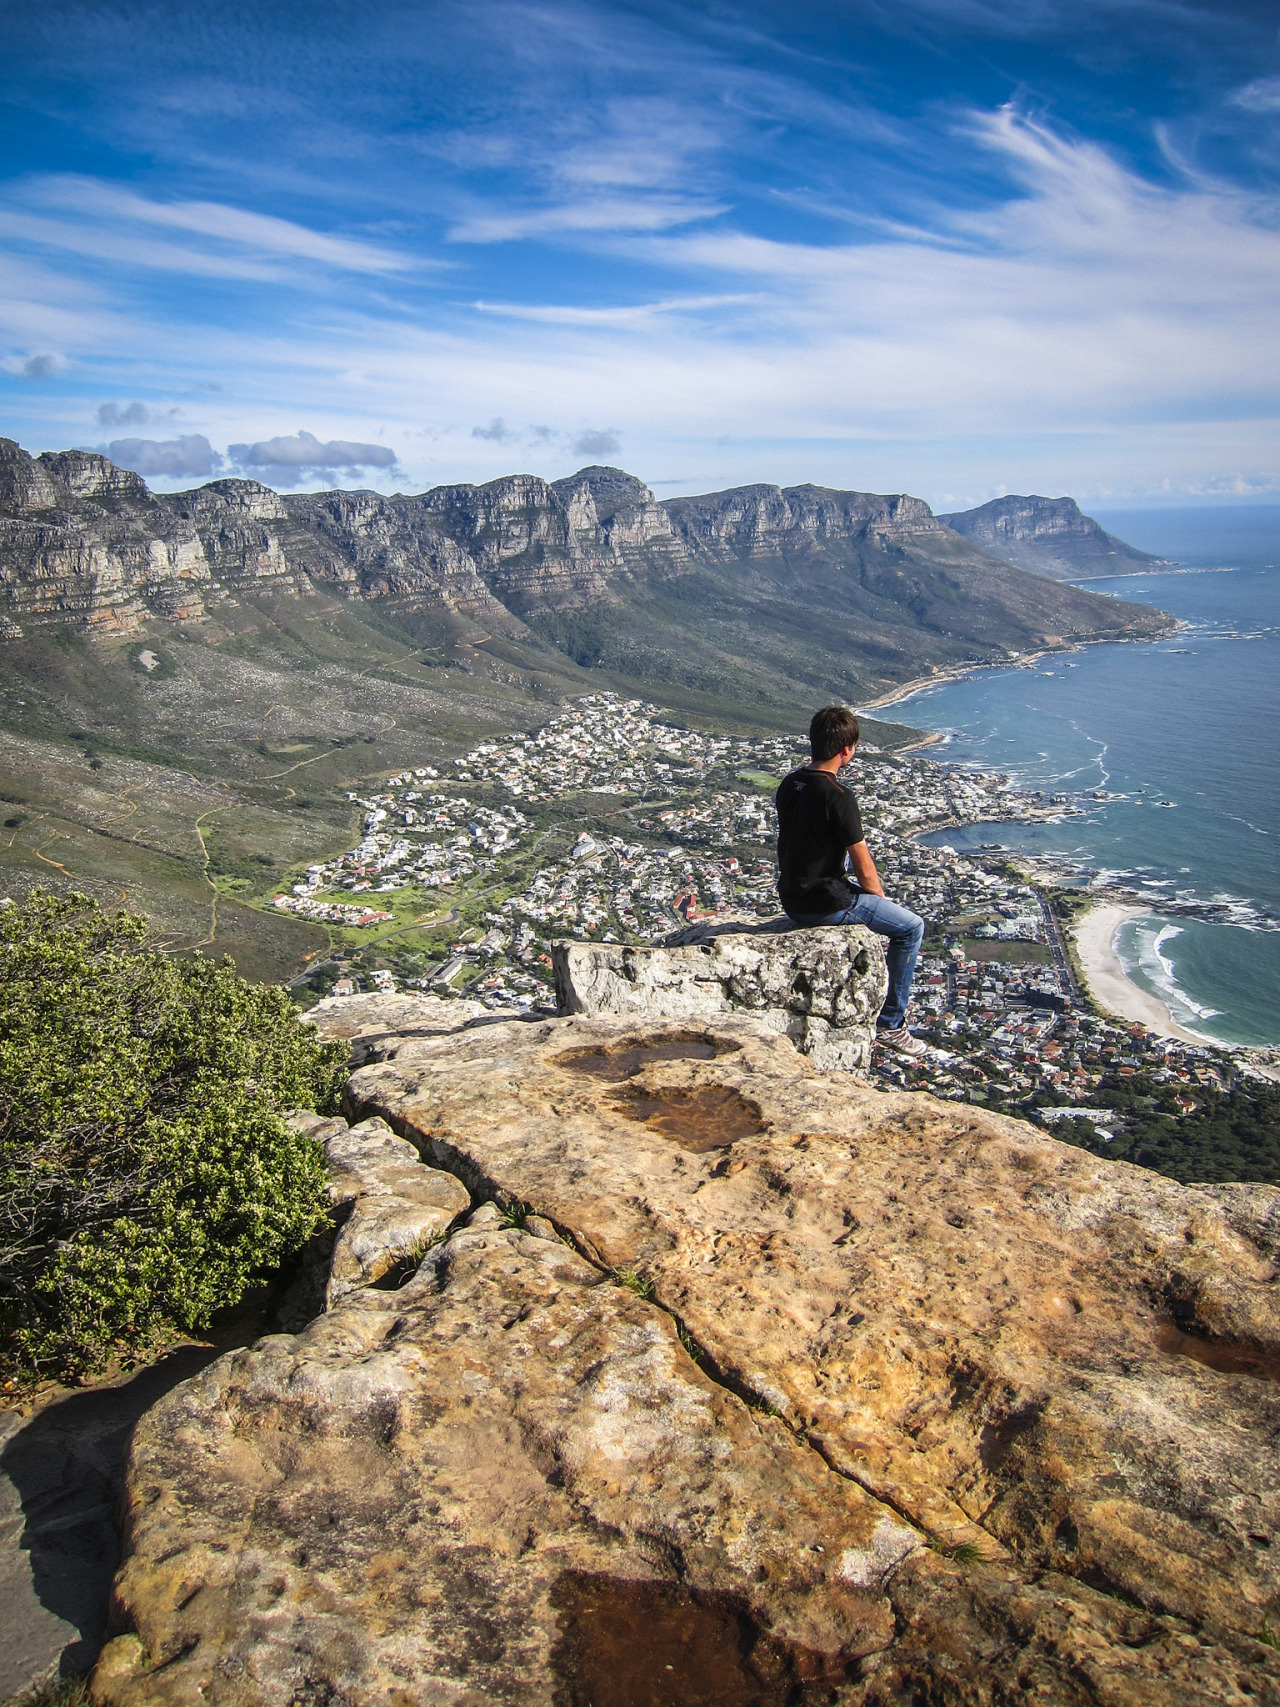 Enjoying the view, Cape Town / South Africa